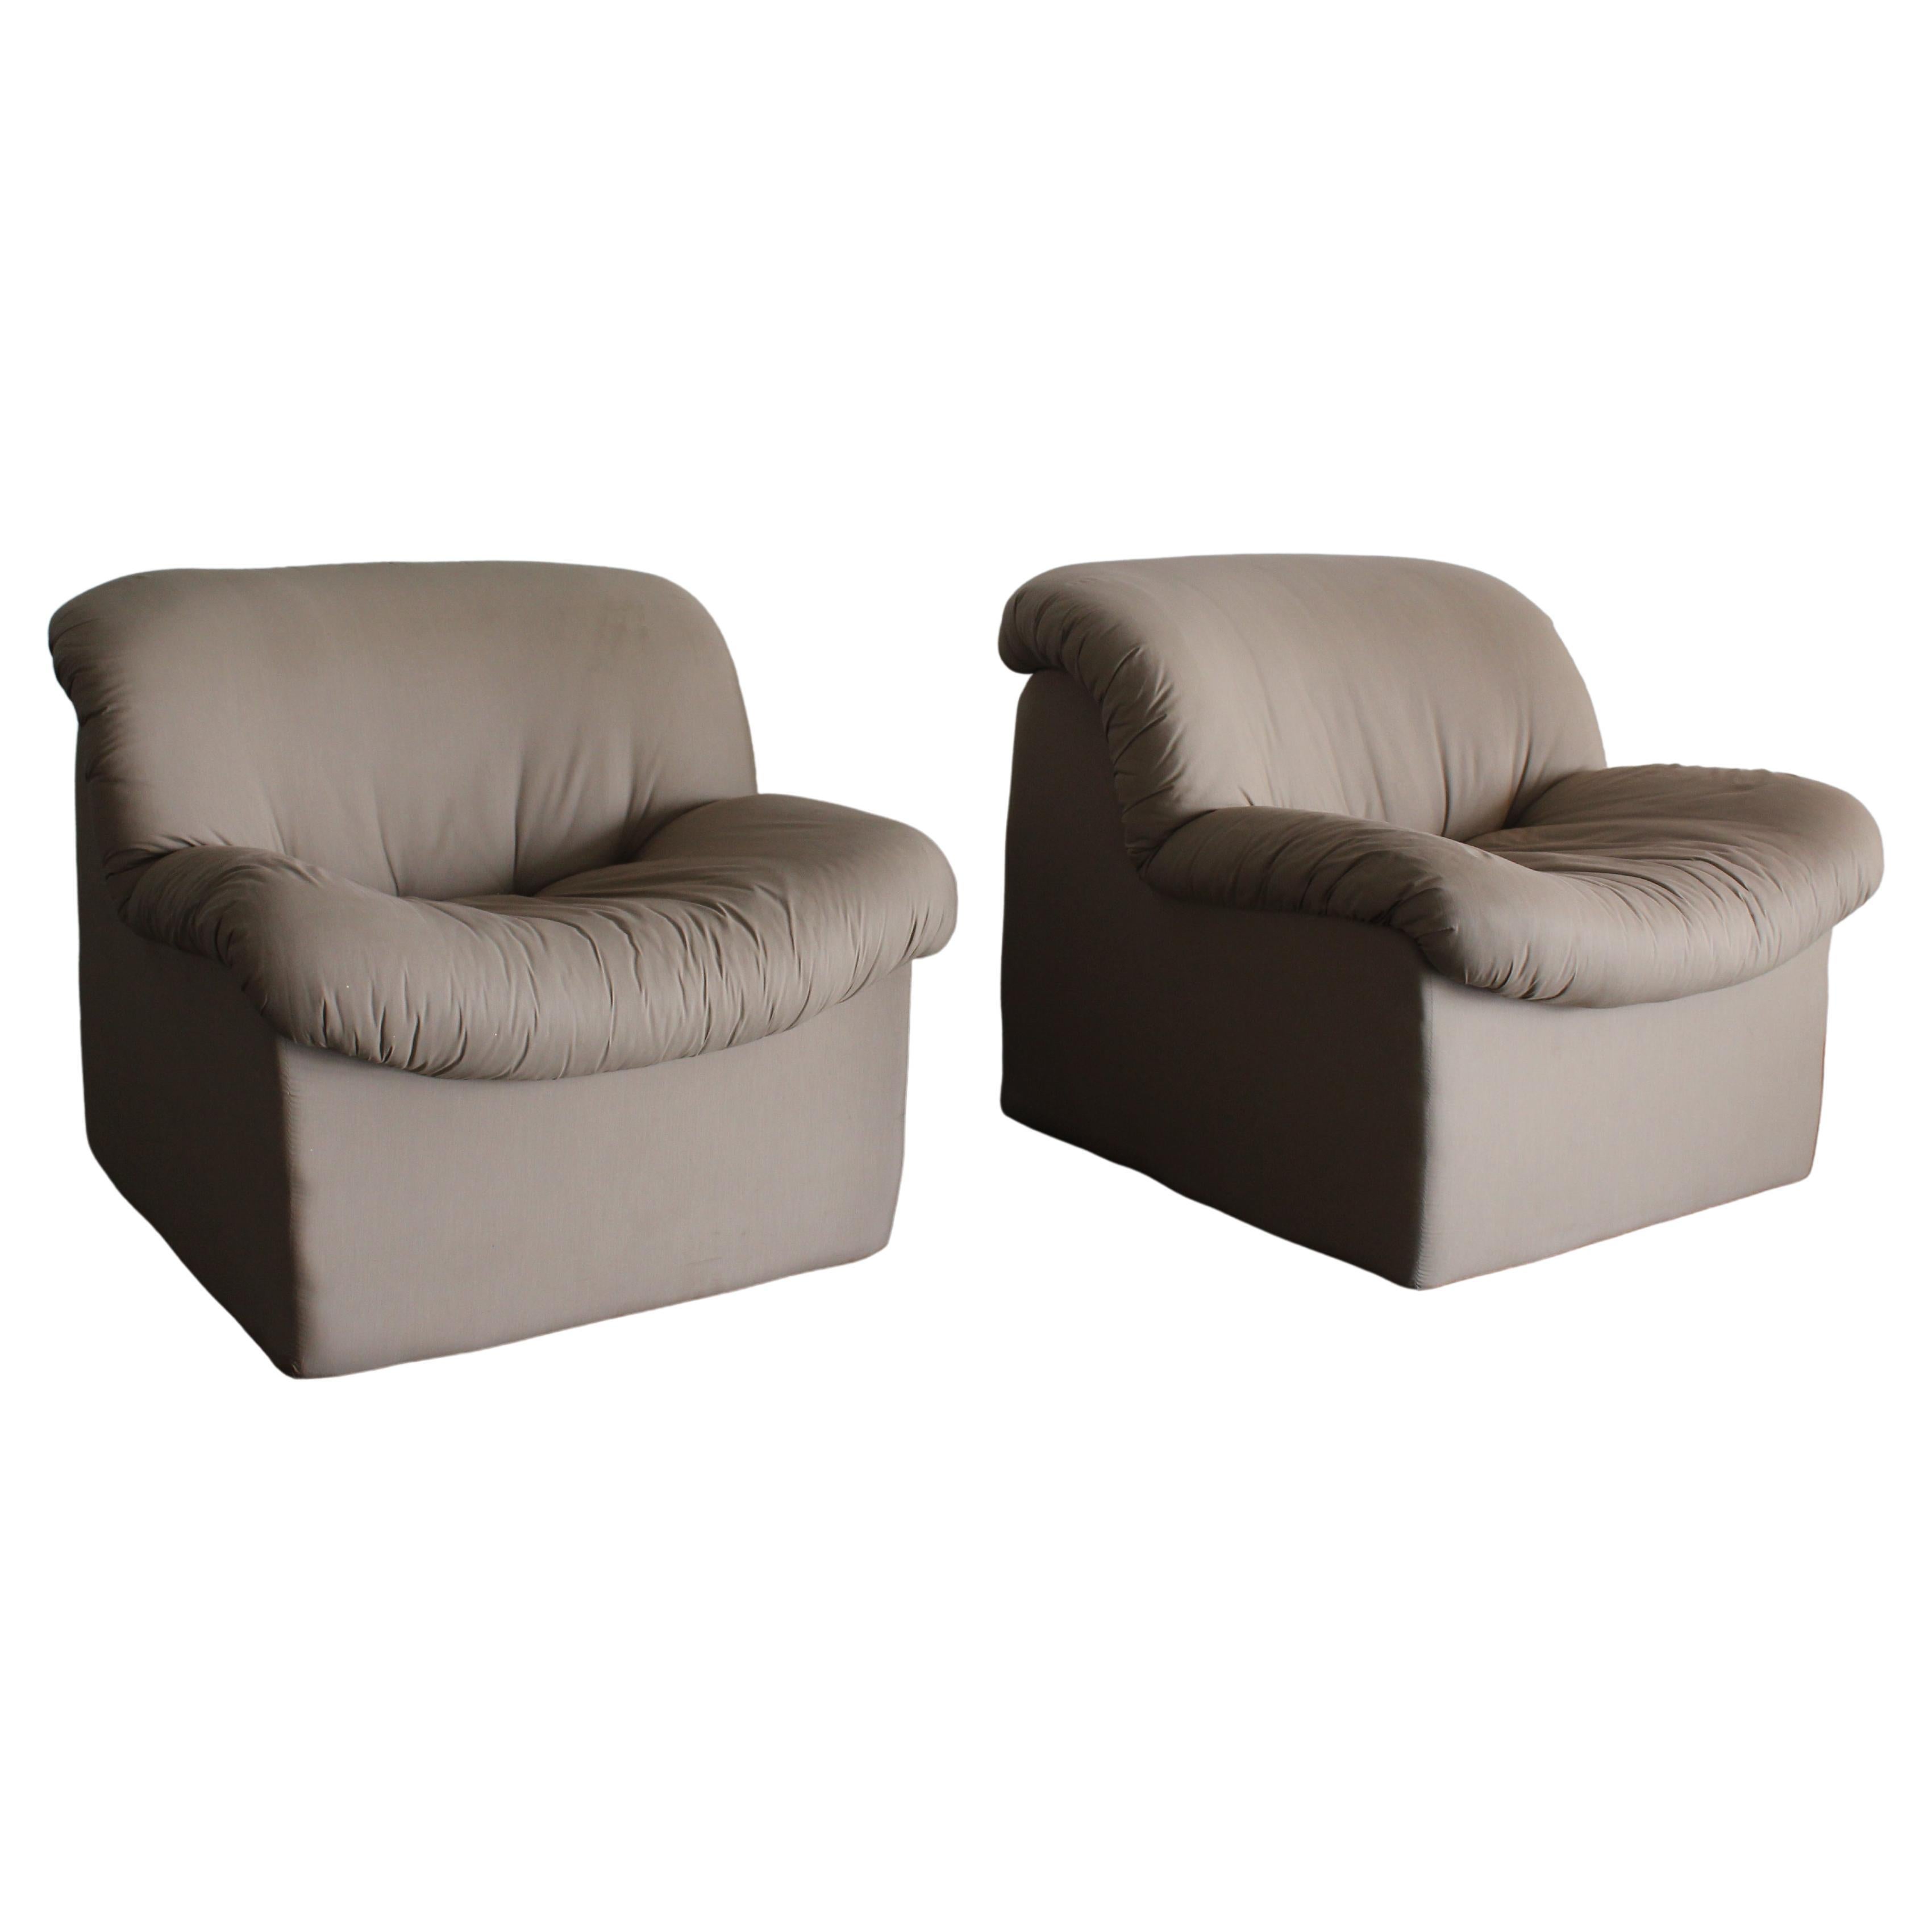 Milo Baughman Style Lounge Chairs For Sale